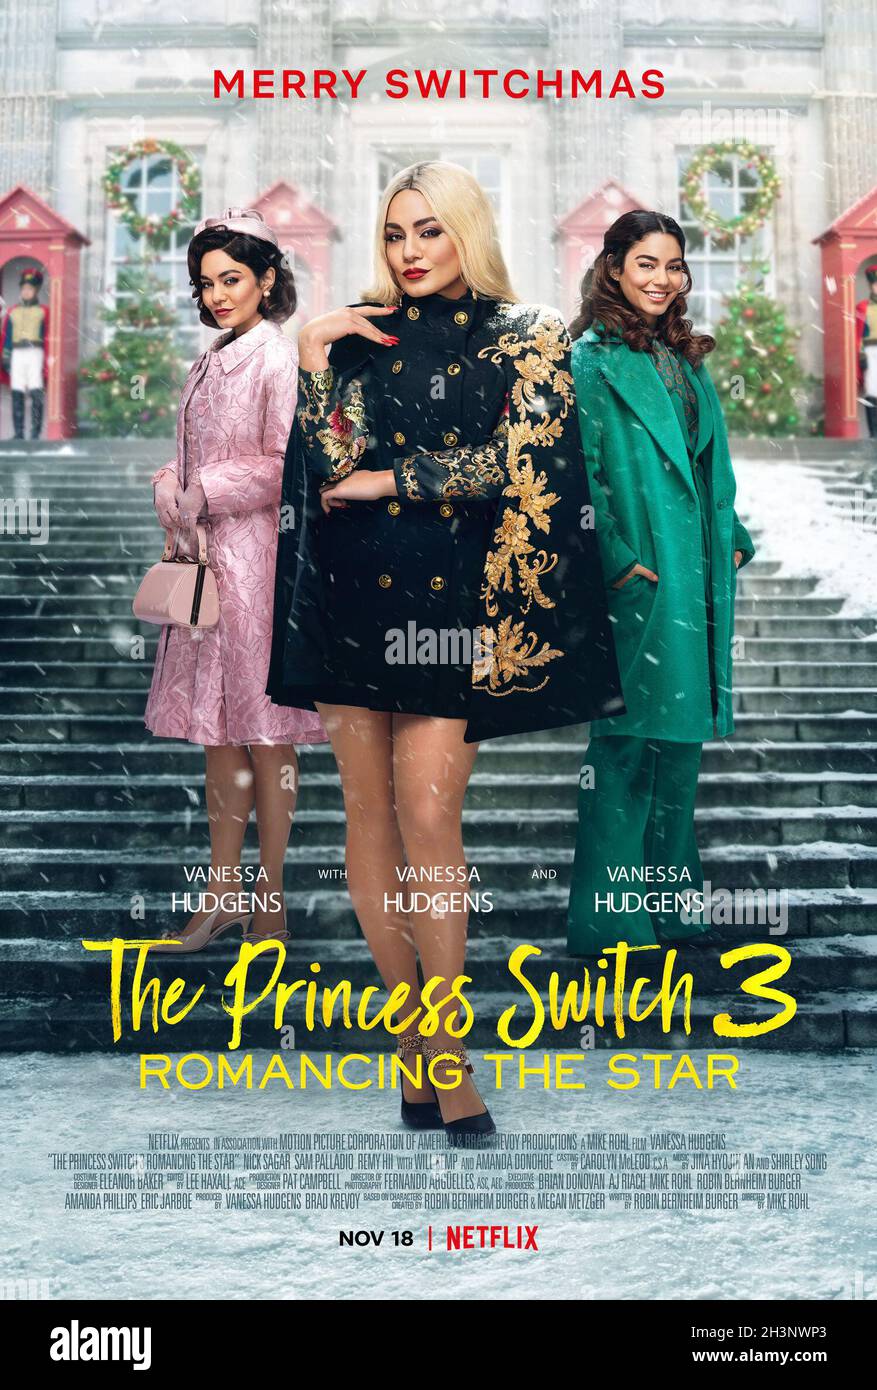 RELEASE DATE: November 18, 2021 TITLE: The Princess Switch 3: Romancing the Star STUDIO: Netflix DIRECTOR: Mike Rohl PLOT: When a priceless relic is stolen, Queen Margaret and Princess Stacy enlist the help of Margaret's cousin Fiona teams with a man from her past to retrieve it, with romance and resulting in a very unexpected switch. STARRING: VANESSA HUDGENS as Fiona poster art. (Credit Image: © Netflix/Entertainment Pictures) Stock Photo